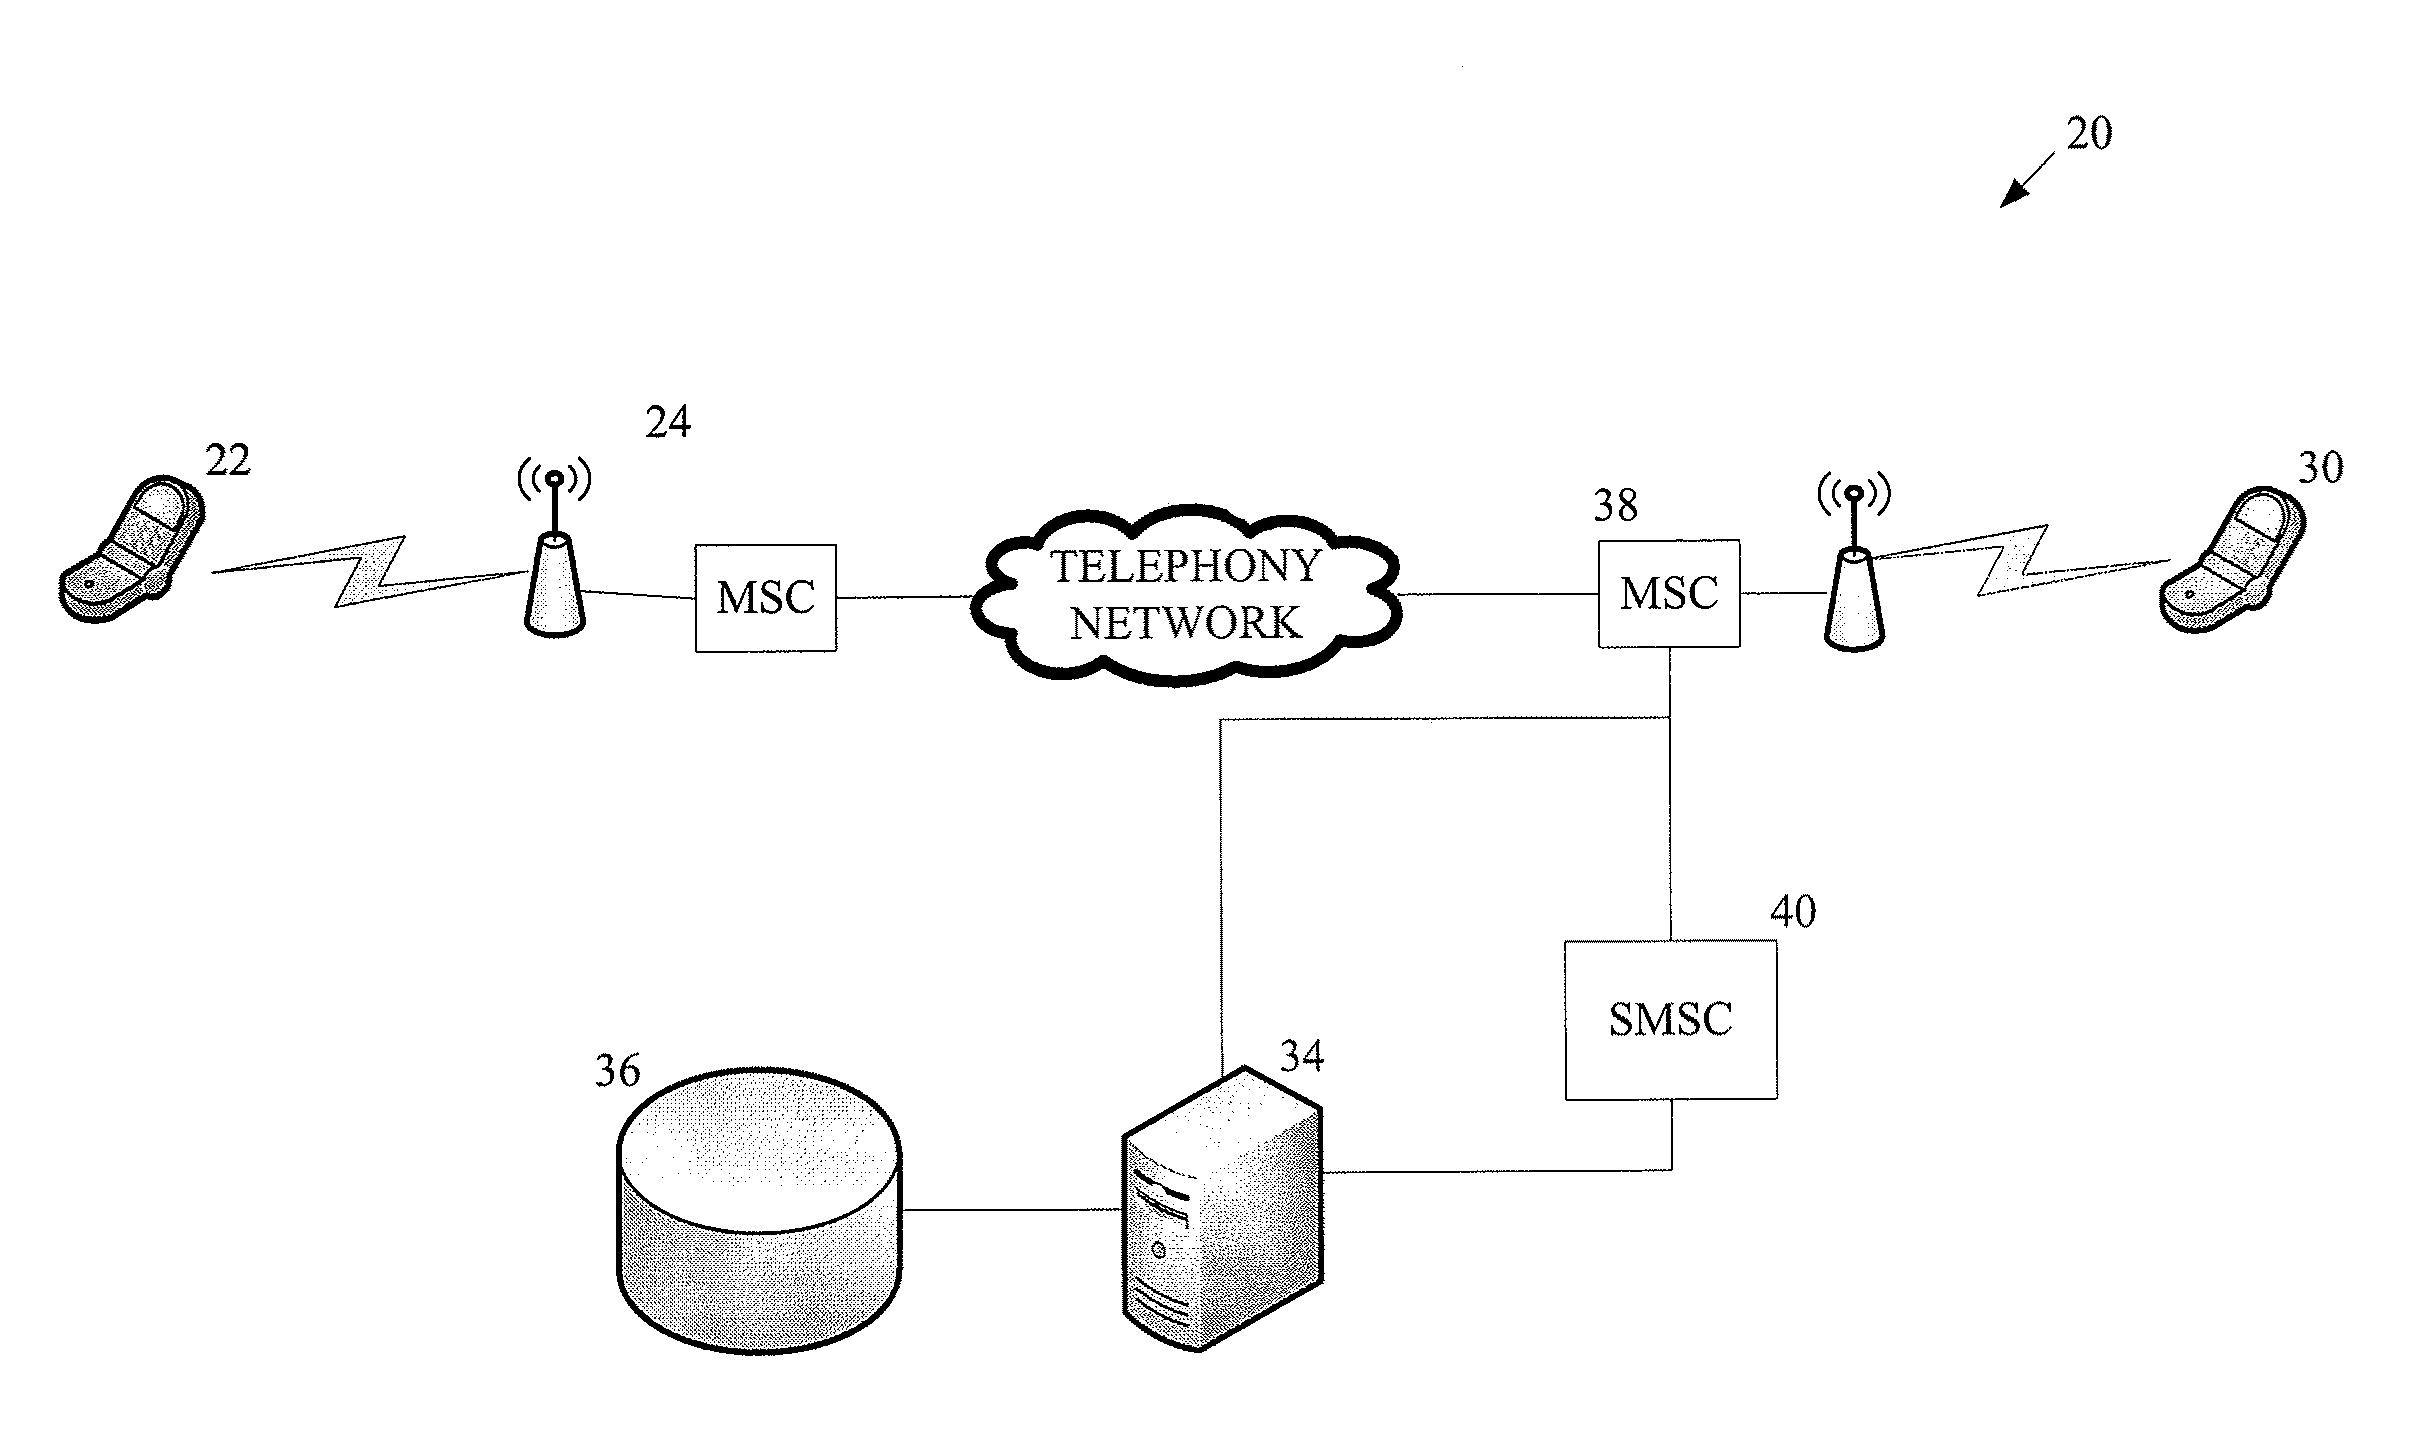 System and method for determination of network and conditional execution of applications and promotions